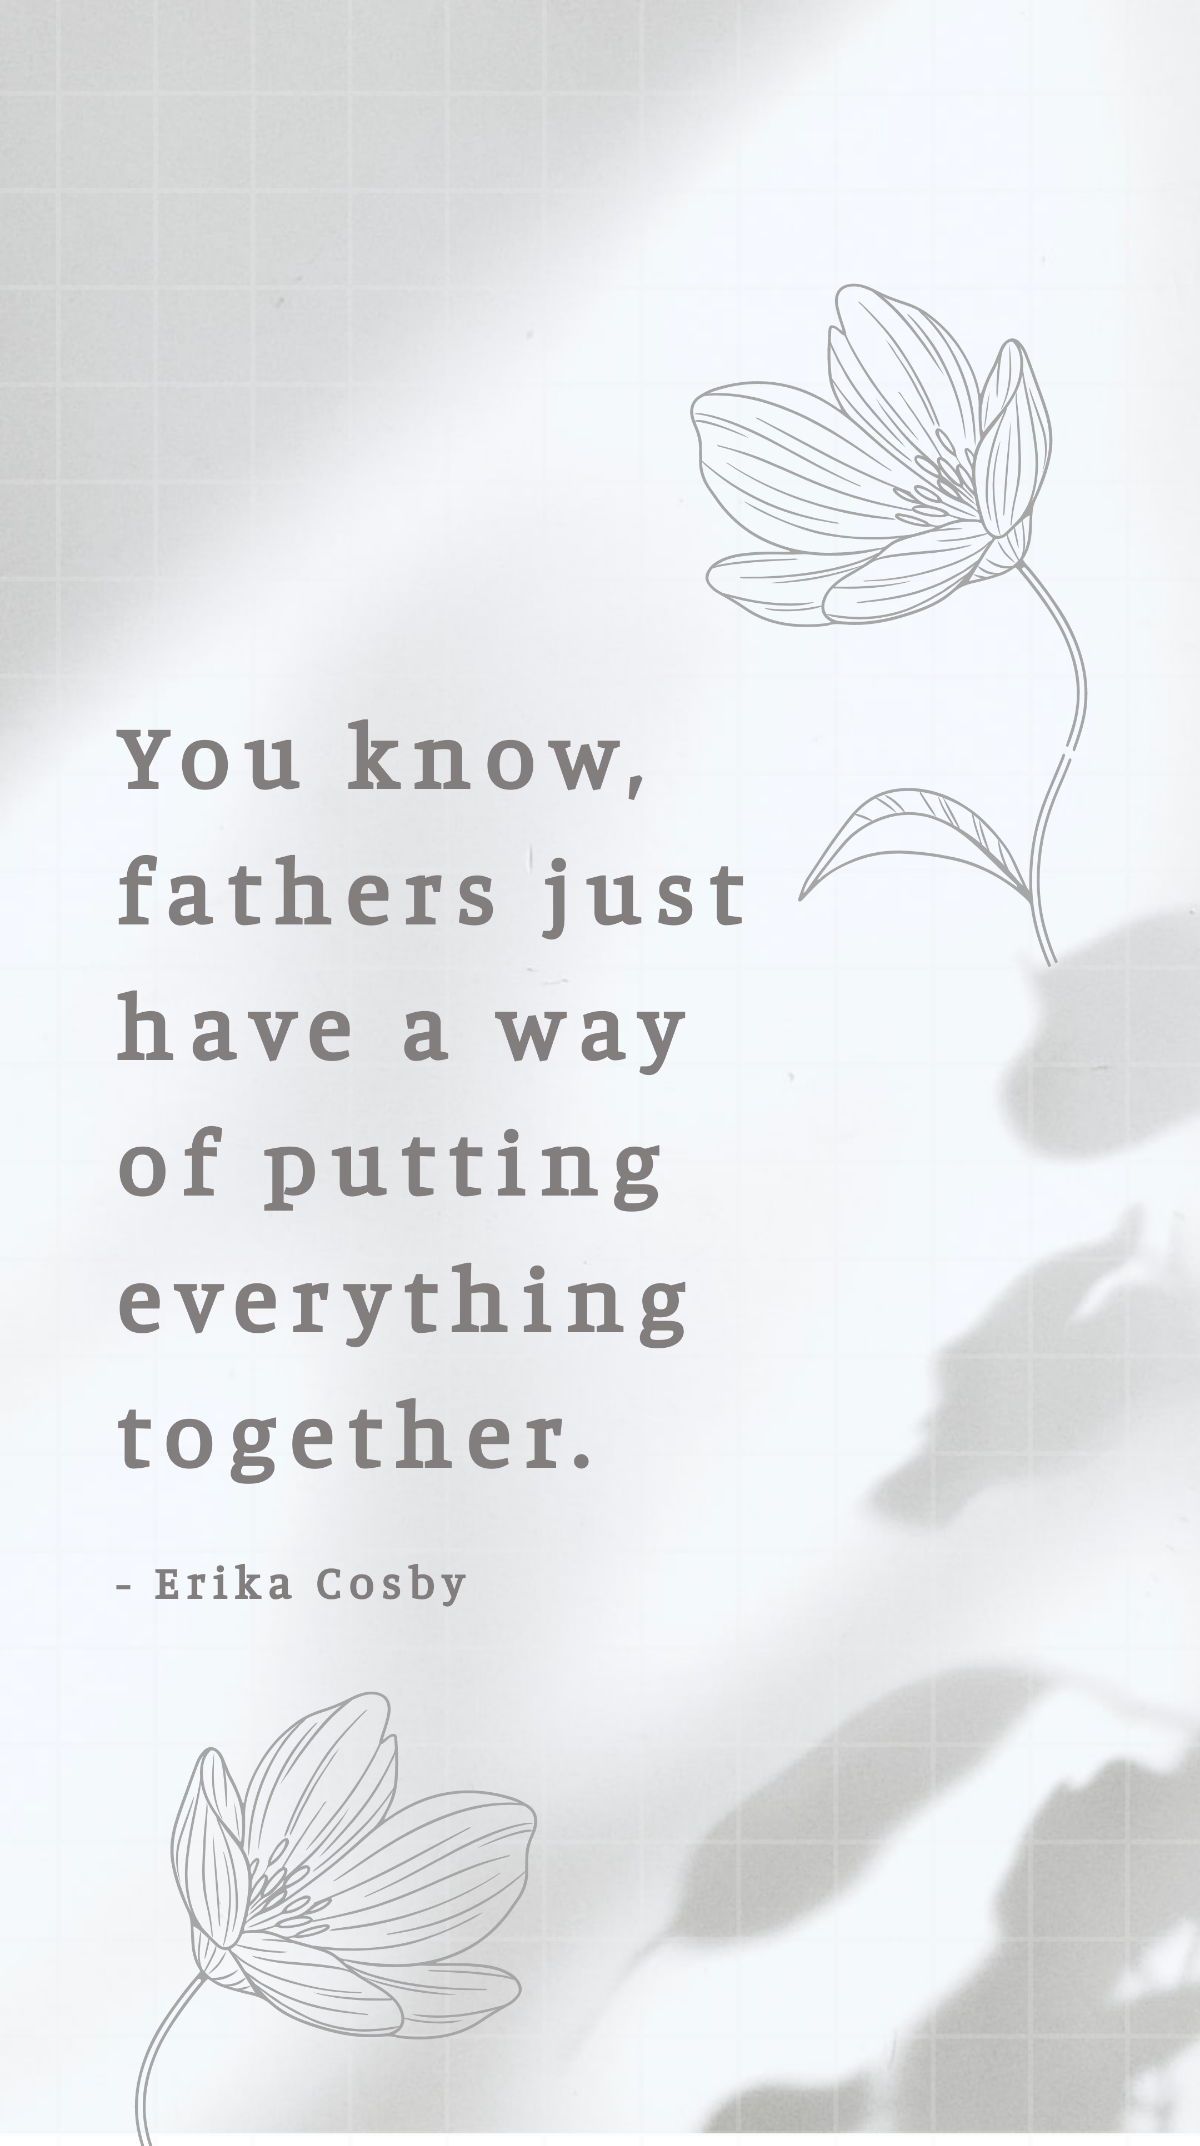 Erika Cosby - You know, fathers just have a way of putting everything together. Template